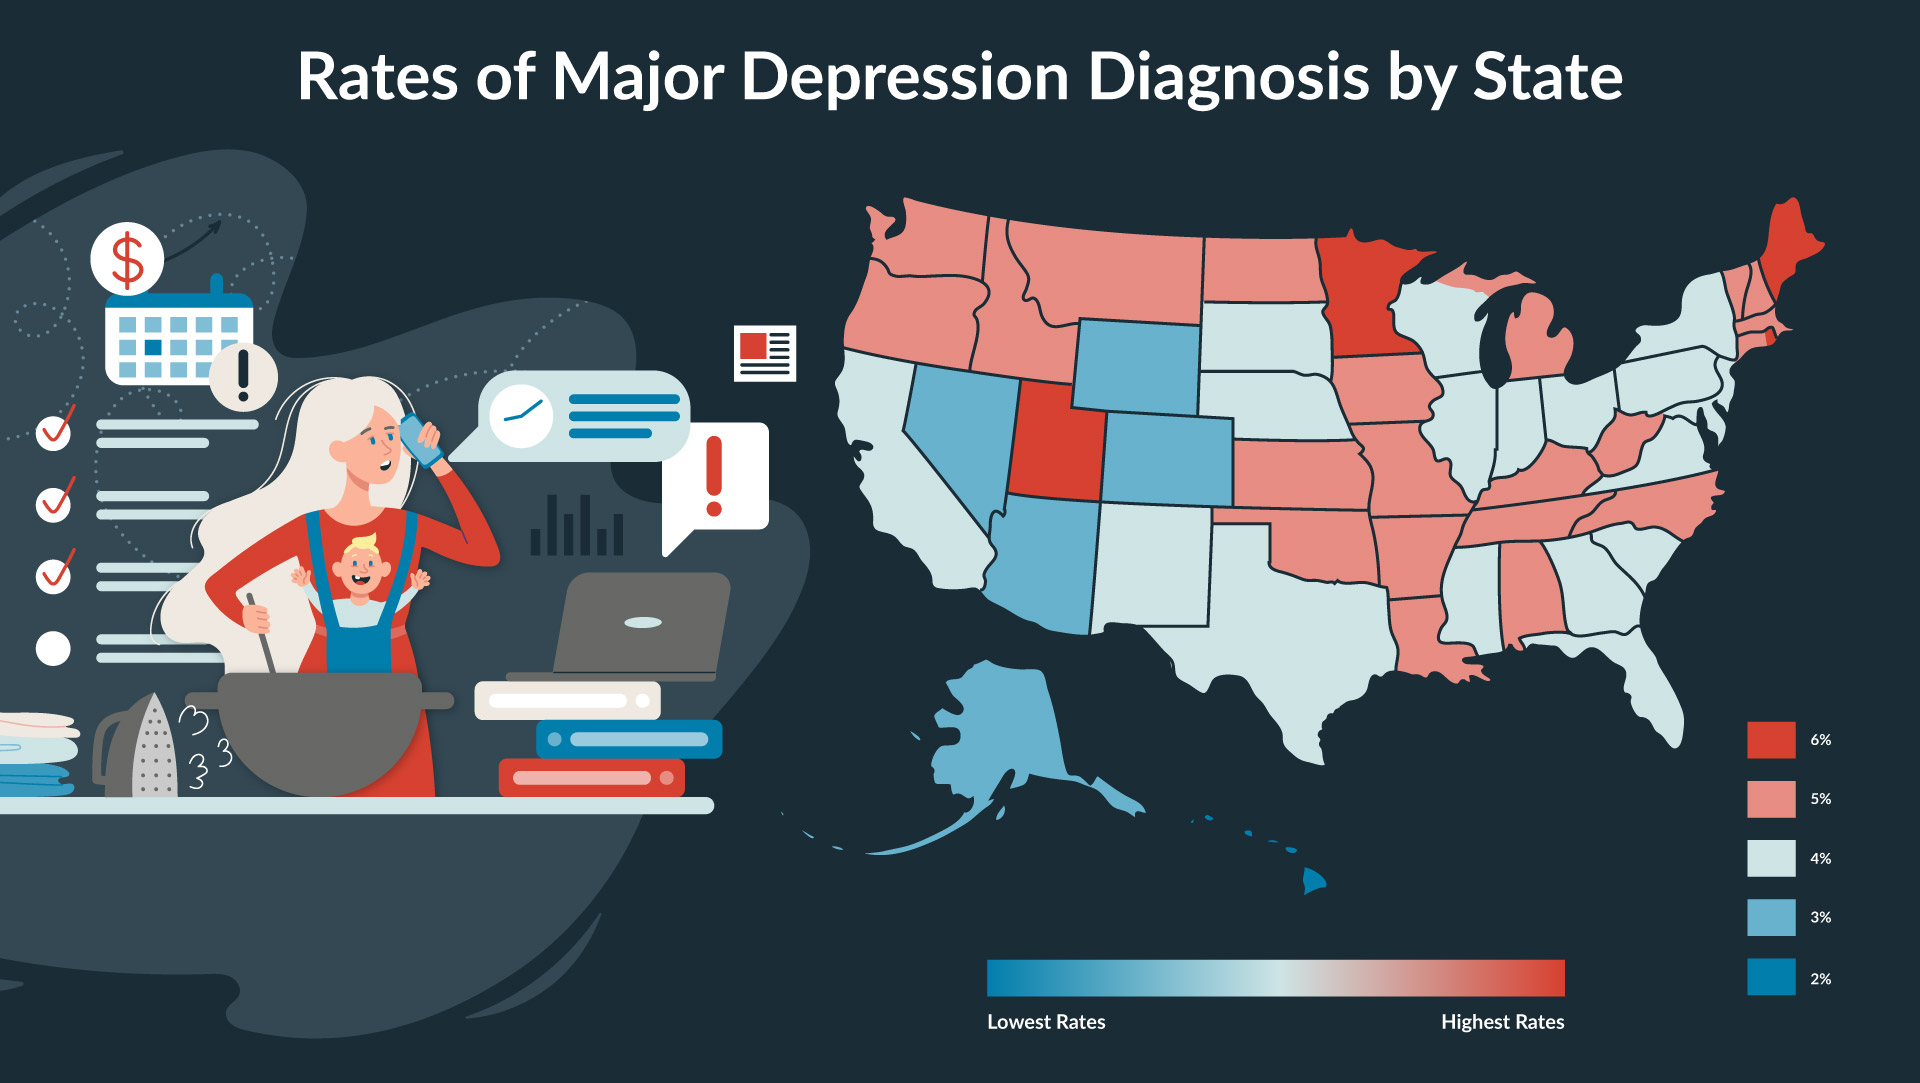 Illustration showing heightened rates of mental health diagnoses across U.S.